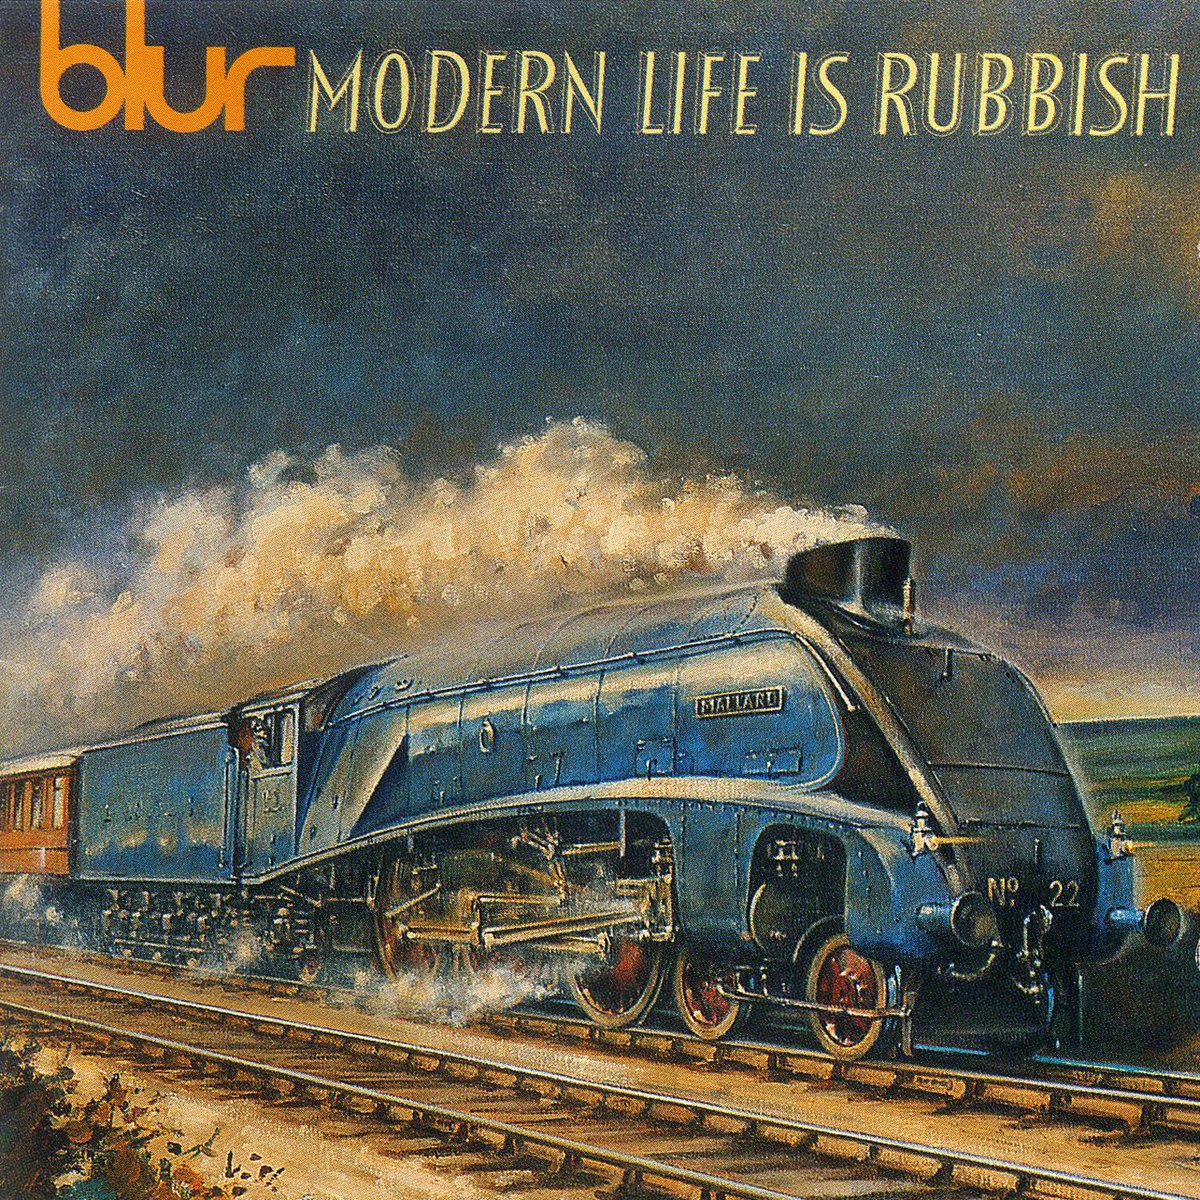 On this day in 1993, @blurofficial released their second studio album, Modern Life Is Rubbish. Produced by @StreetStephen it reached number 15 in the UK charts and included the singles For Tomorrow, Chemical World & Sunday Sunday.